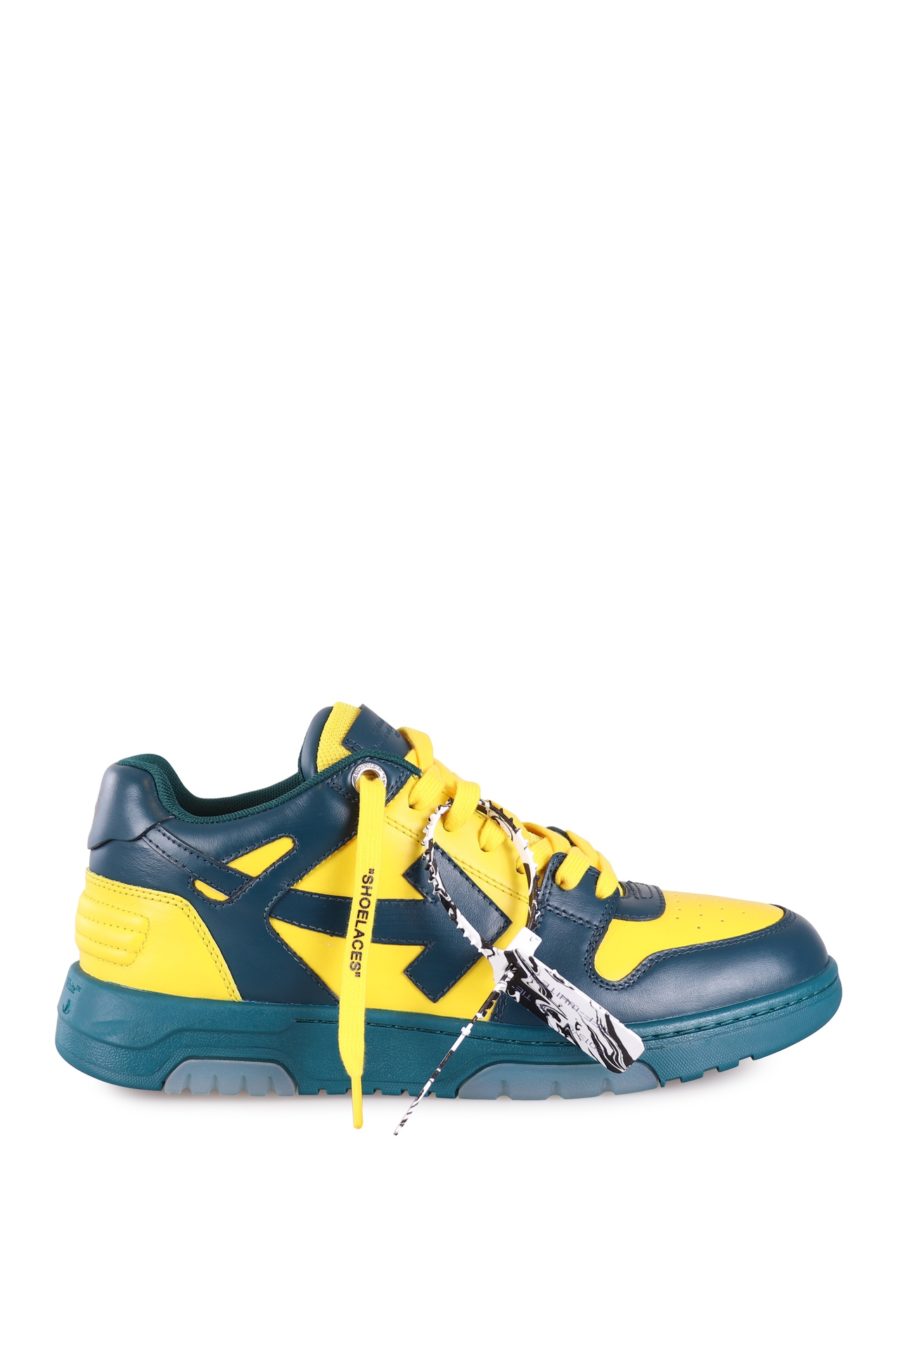 Trainers Off-White "out of office" blue with yellow - 8ee539f3edee0bcde7f318170292d6886b2bf1fa